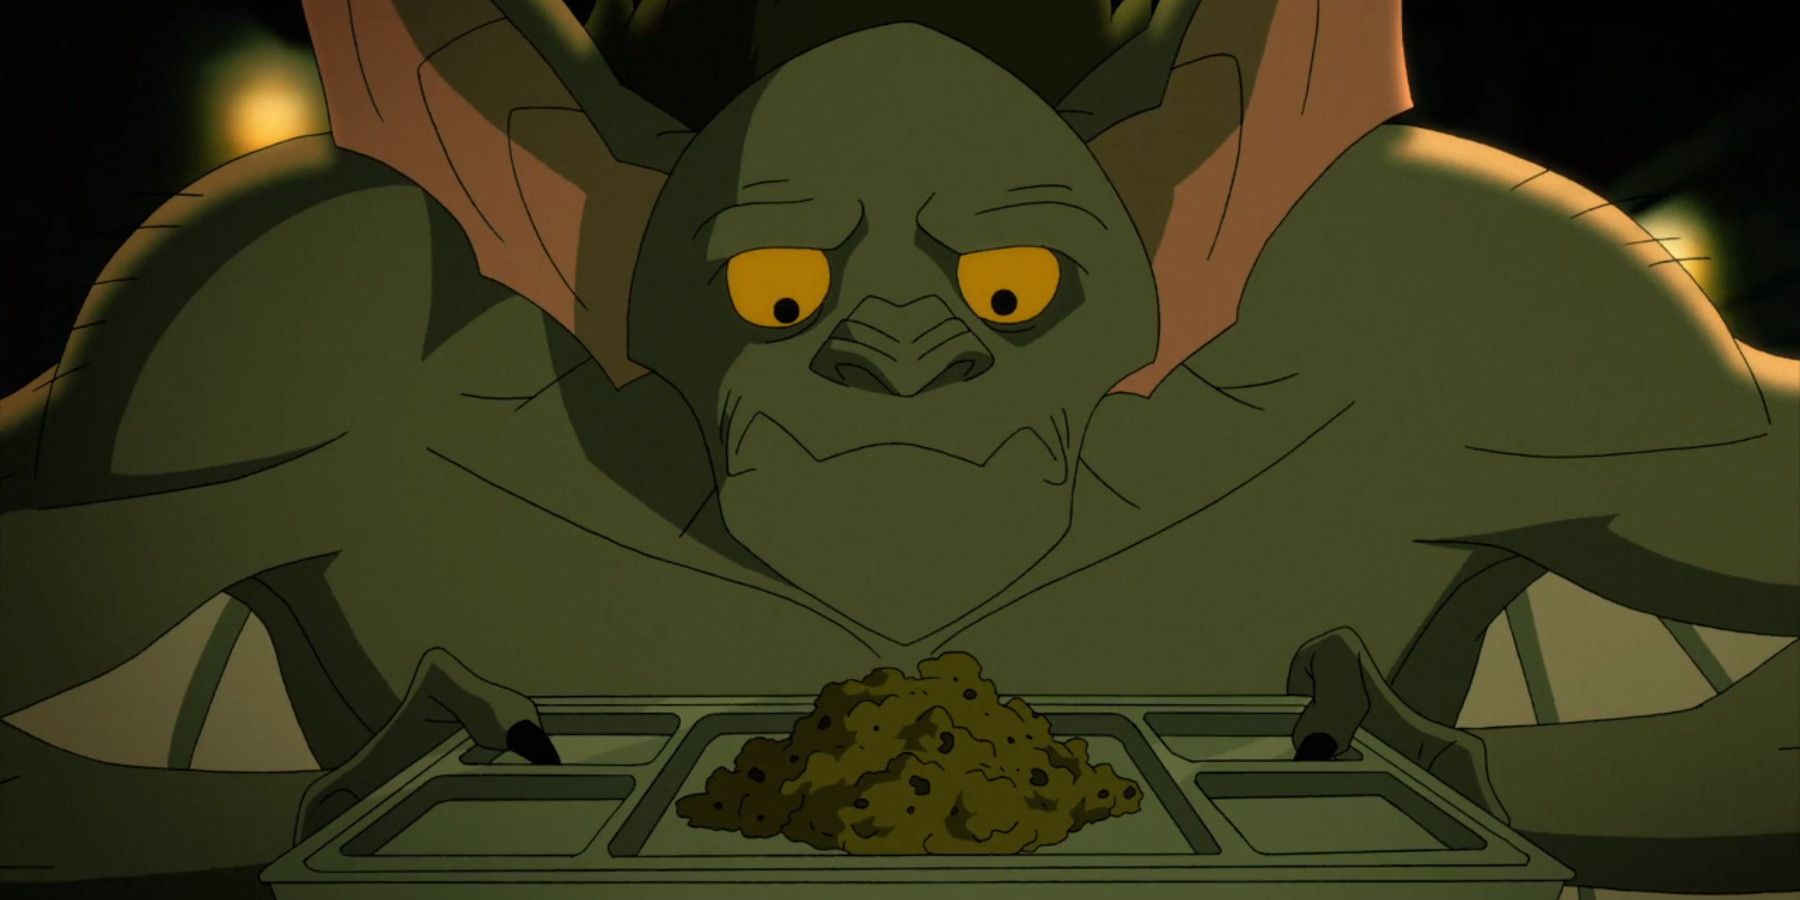 Man-Bat looking at his dinner disgusted in Harley Quinn